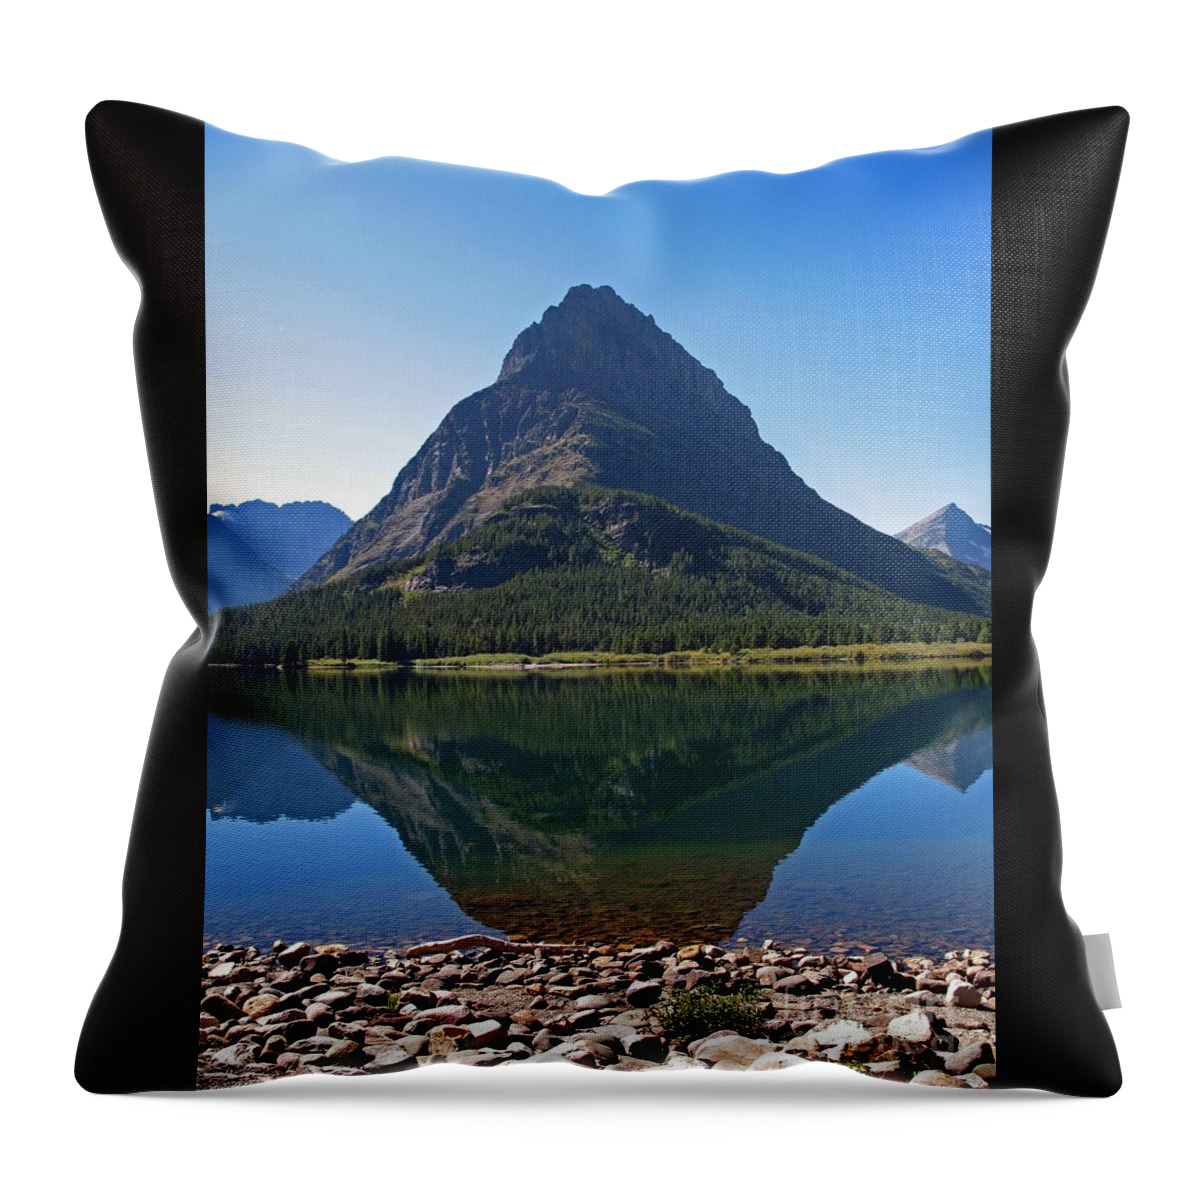 Glacier Park Montana Art Throw Pillow featuring the photograph Swiftcurrent Lake Many Glacier by Joseph J Stevens